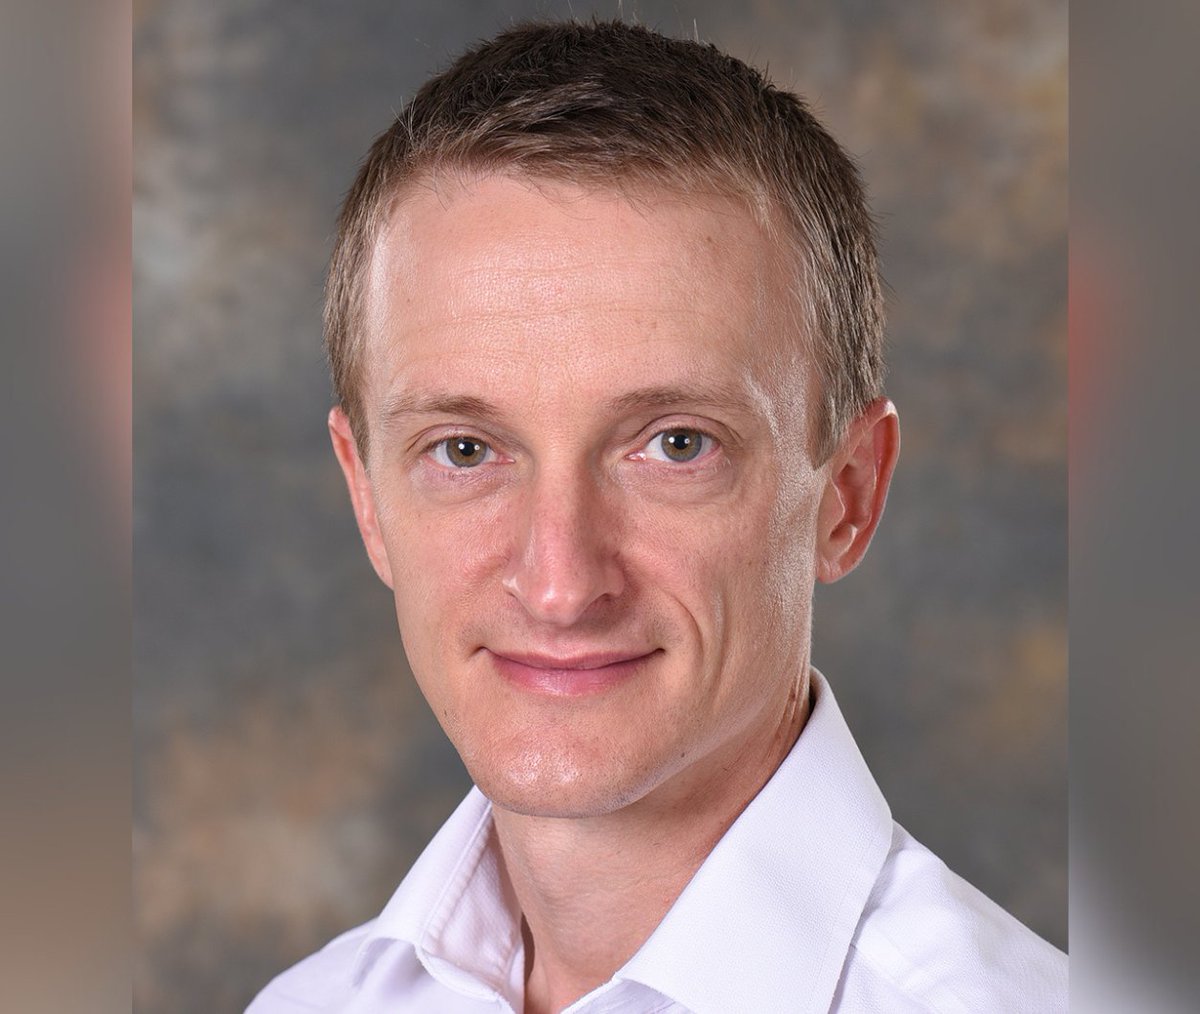 UHDB Physiotherapist Marcus Bateman has been shortlisted for a CRN Rising Star Award for his groundbreaking research into complex musculoskeletal conditions - helping to improve their treatment and care across the world⭐ Congratulations, and good luck! bit.ly/48JqxYS